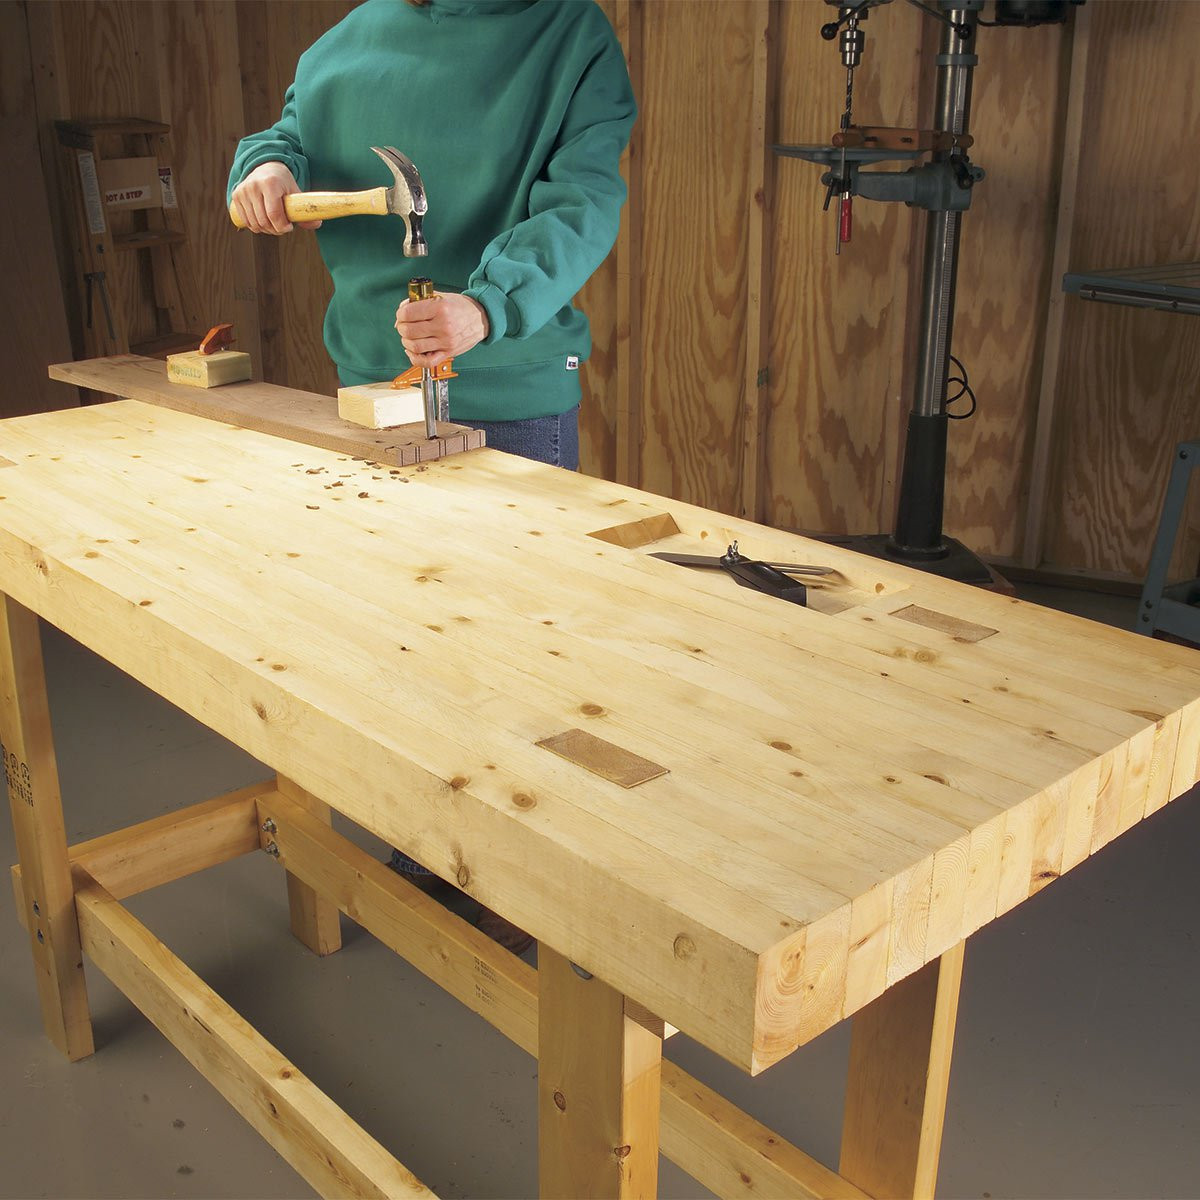 Workbench Plans DIY
 12 Super Simple Workbenches You Can Build